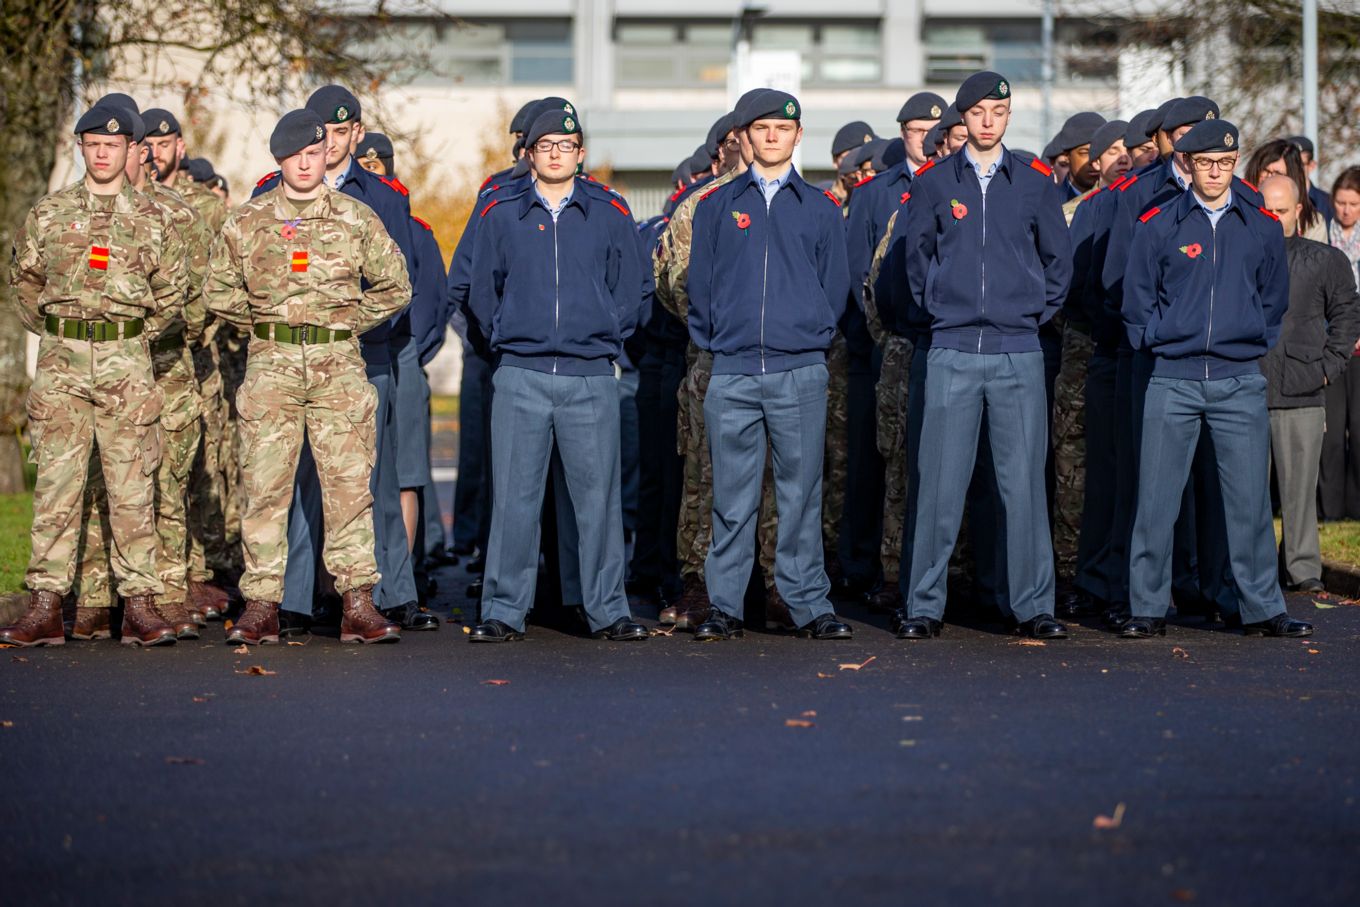 Men in uniform stood during a remembrance parade